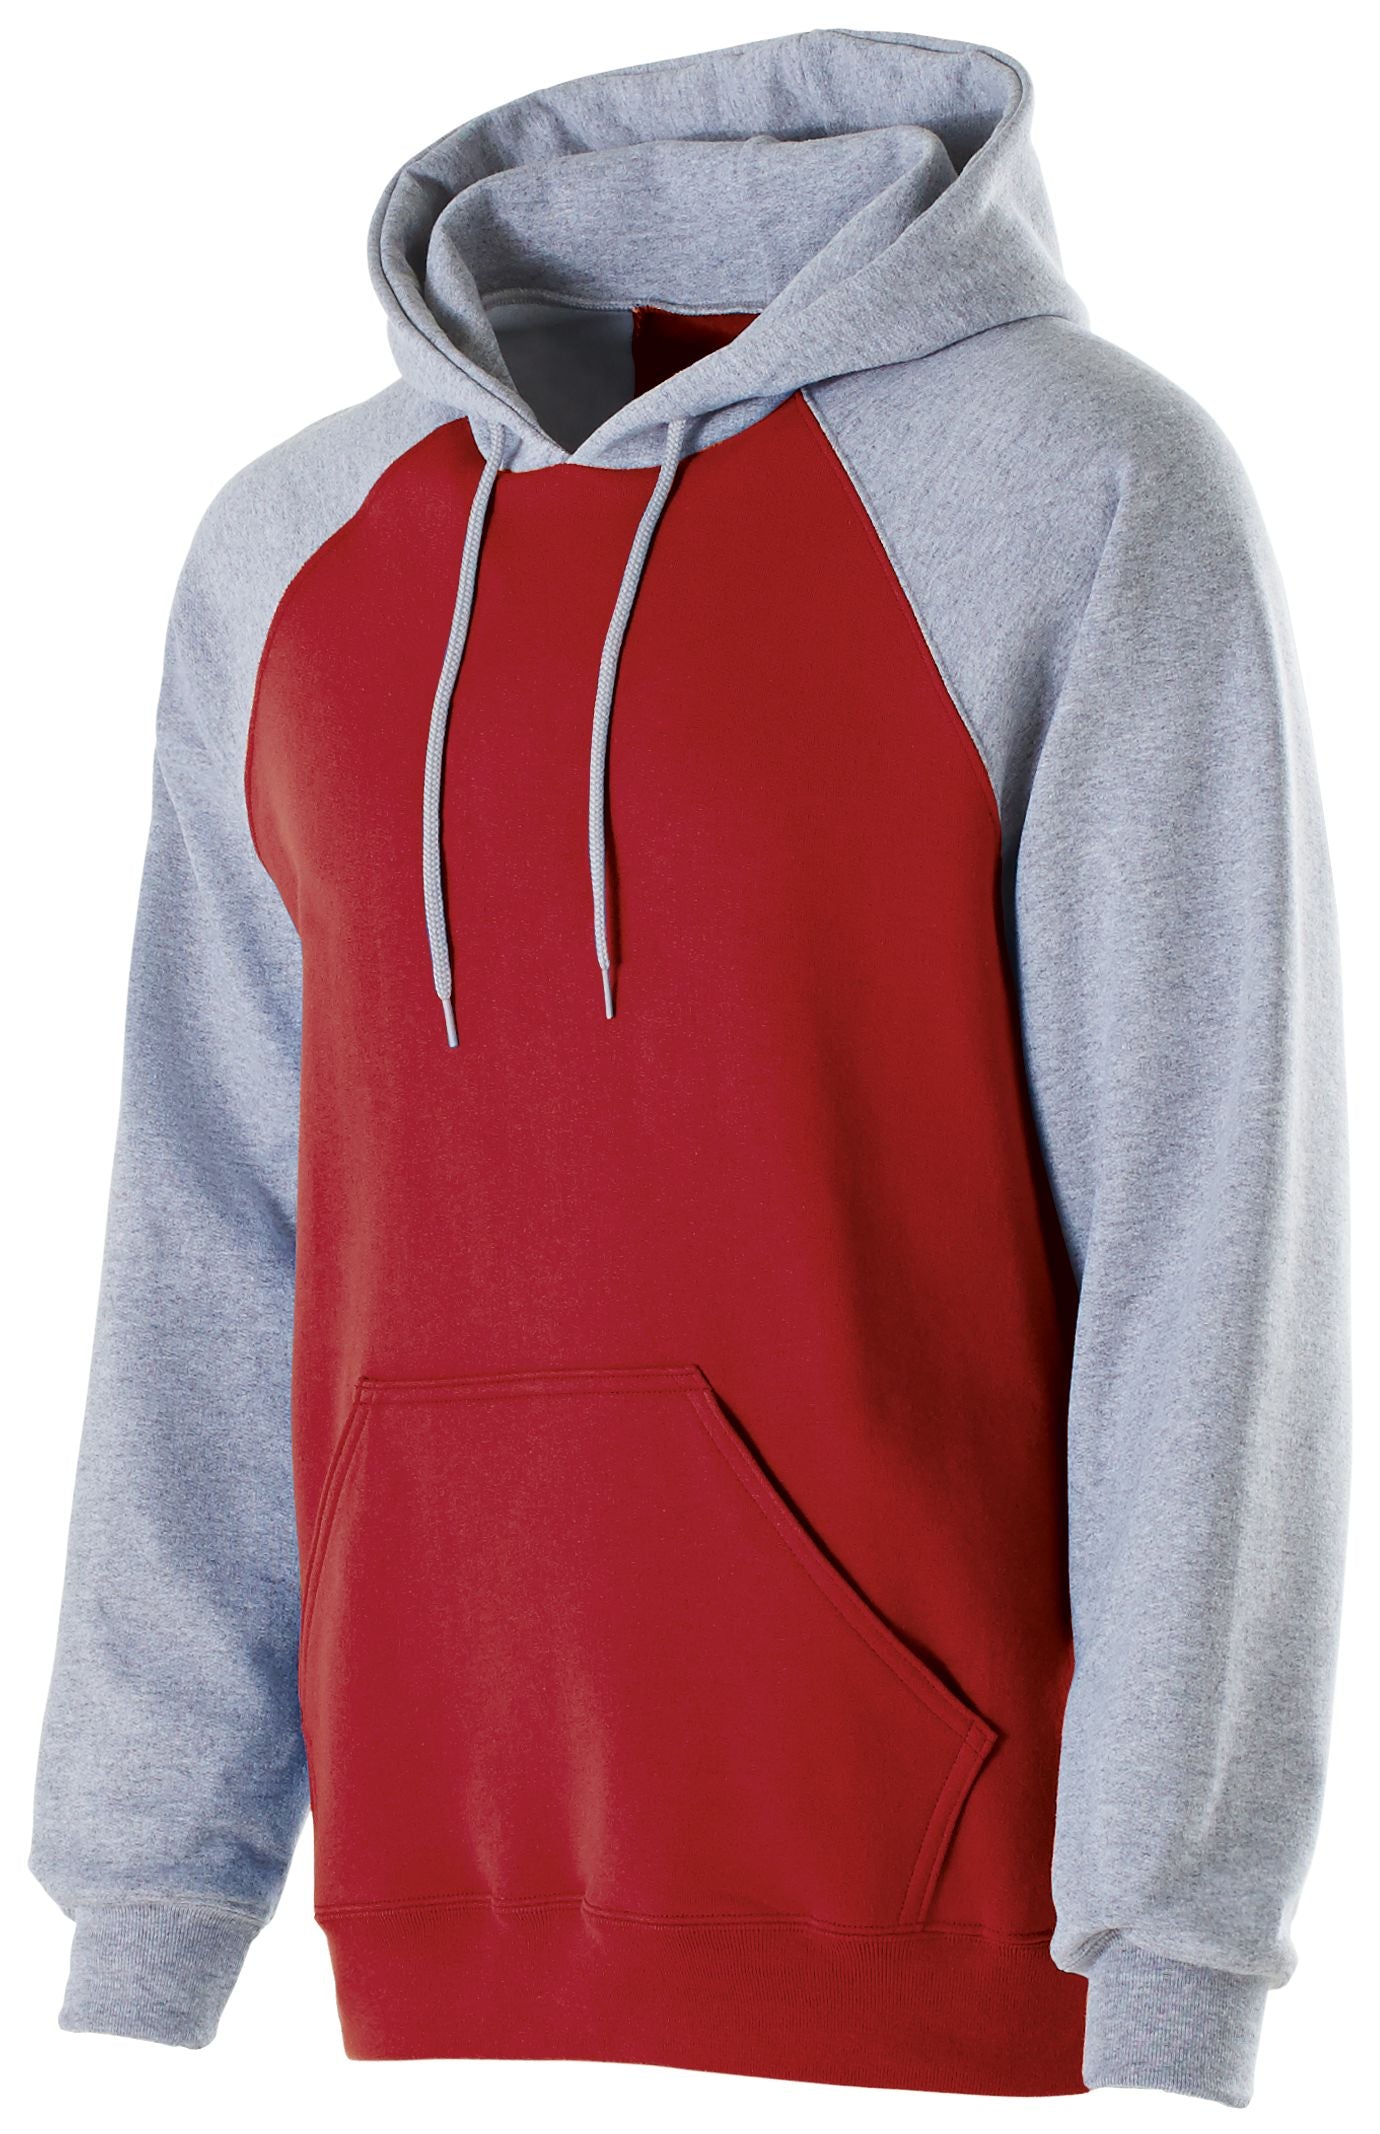 Holloway Banner Hoodie in Red/Athletic Heather  -Part of the Adult, Adult-Hoodie, Hoodies, Holloway product lines at KanaleyCreations.com